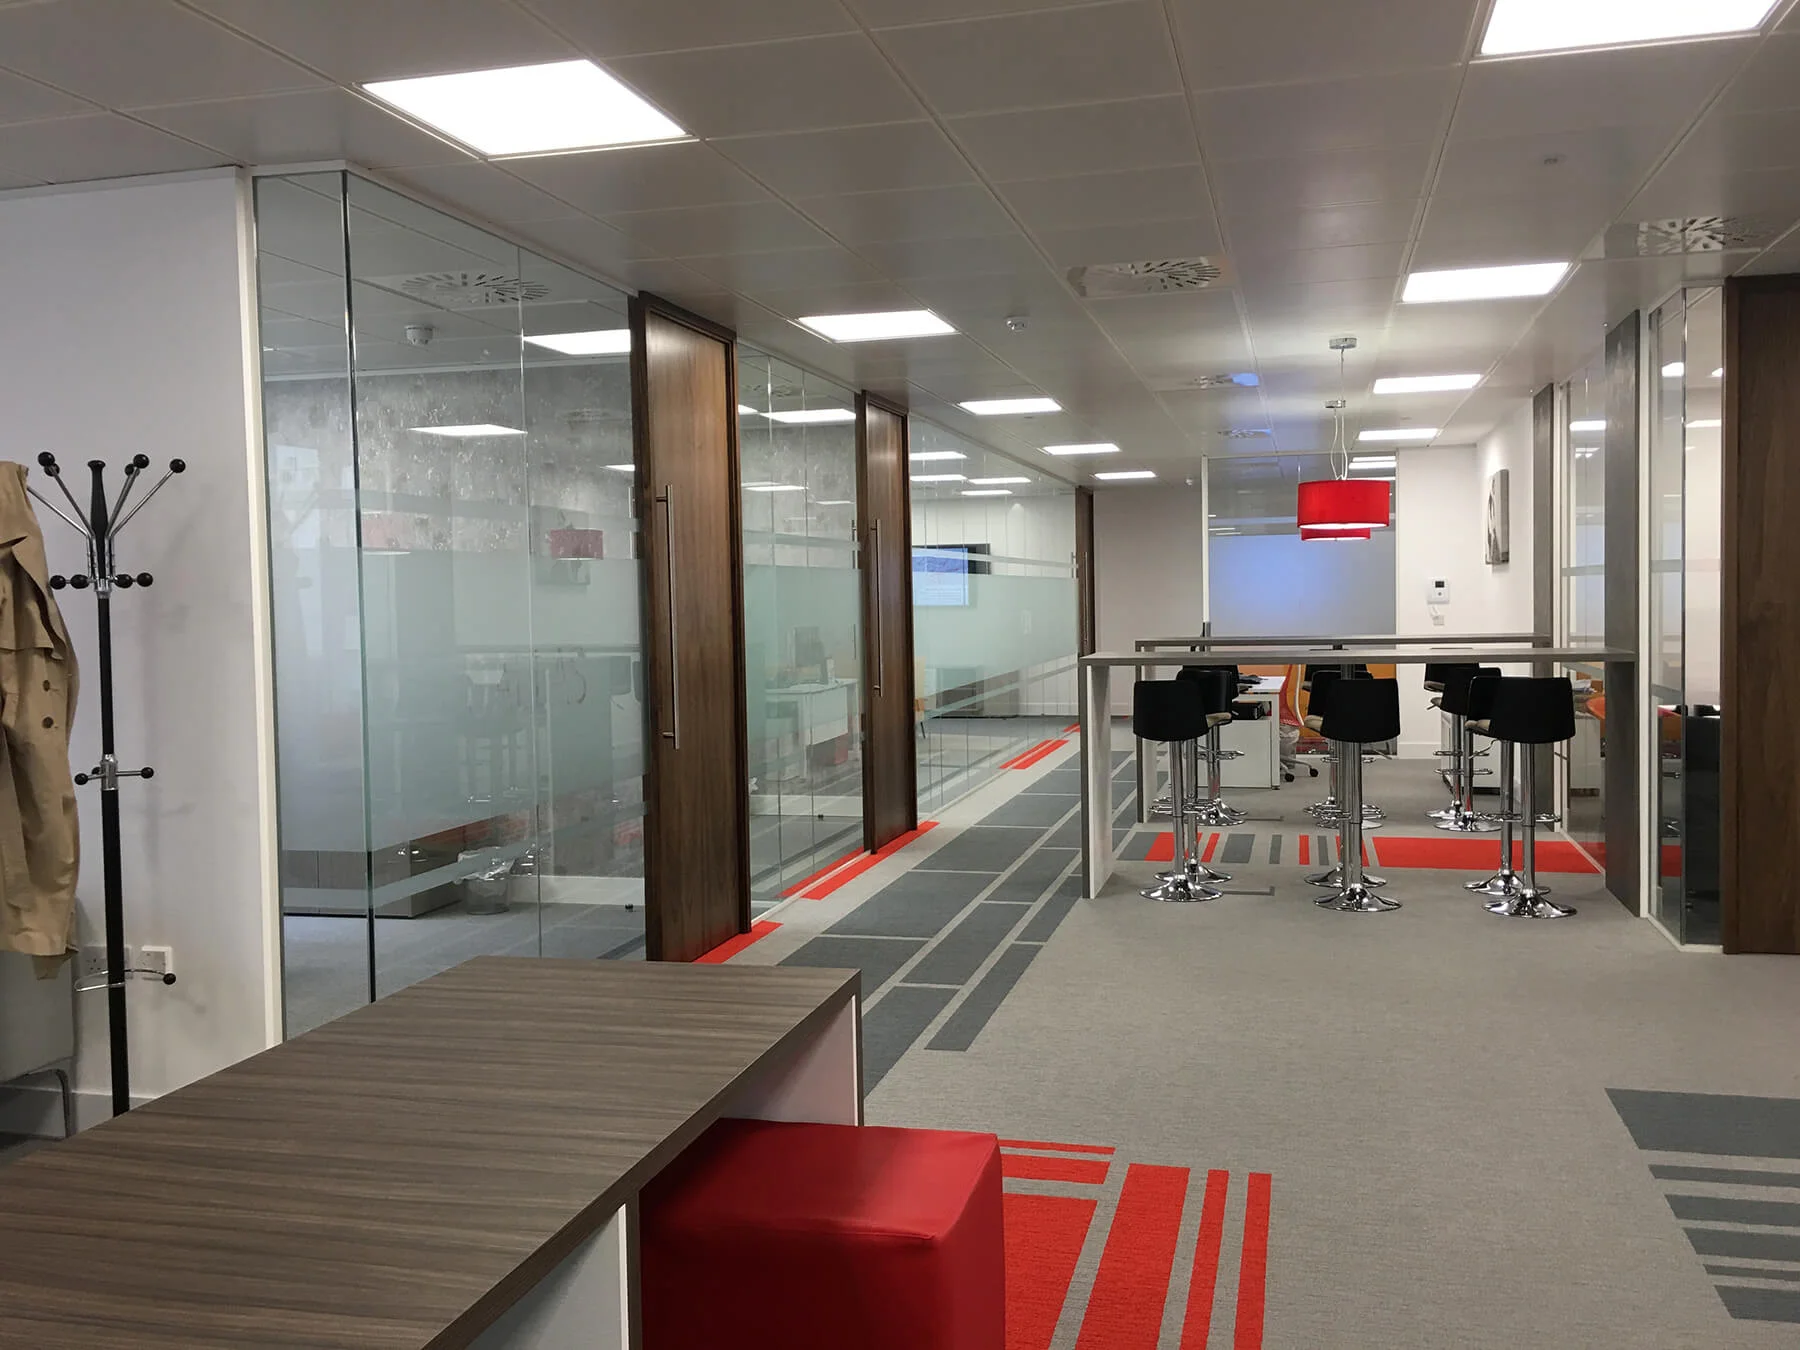 Comparex office space with high desks chairs glass partitions and designer floor